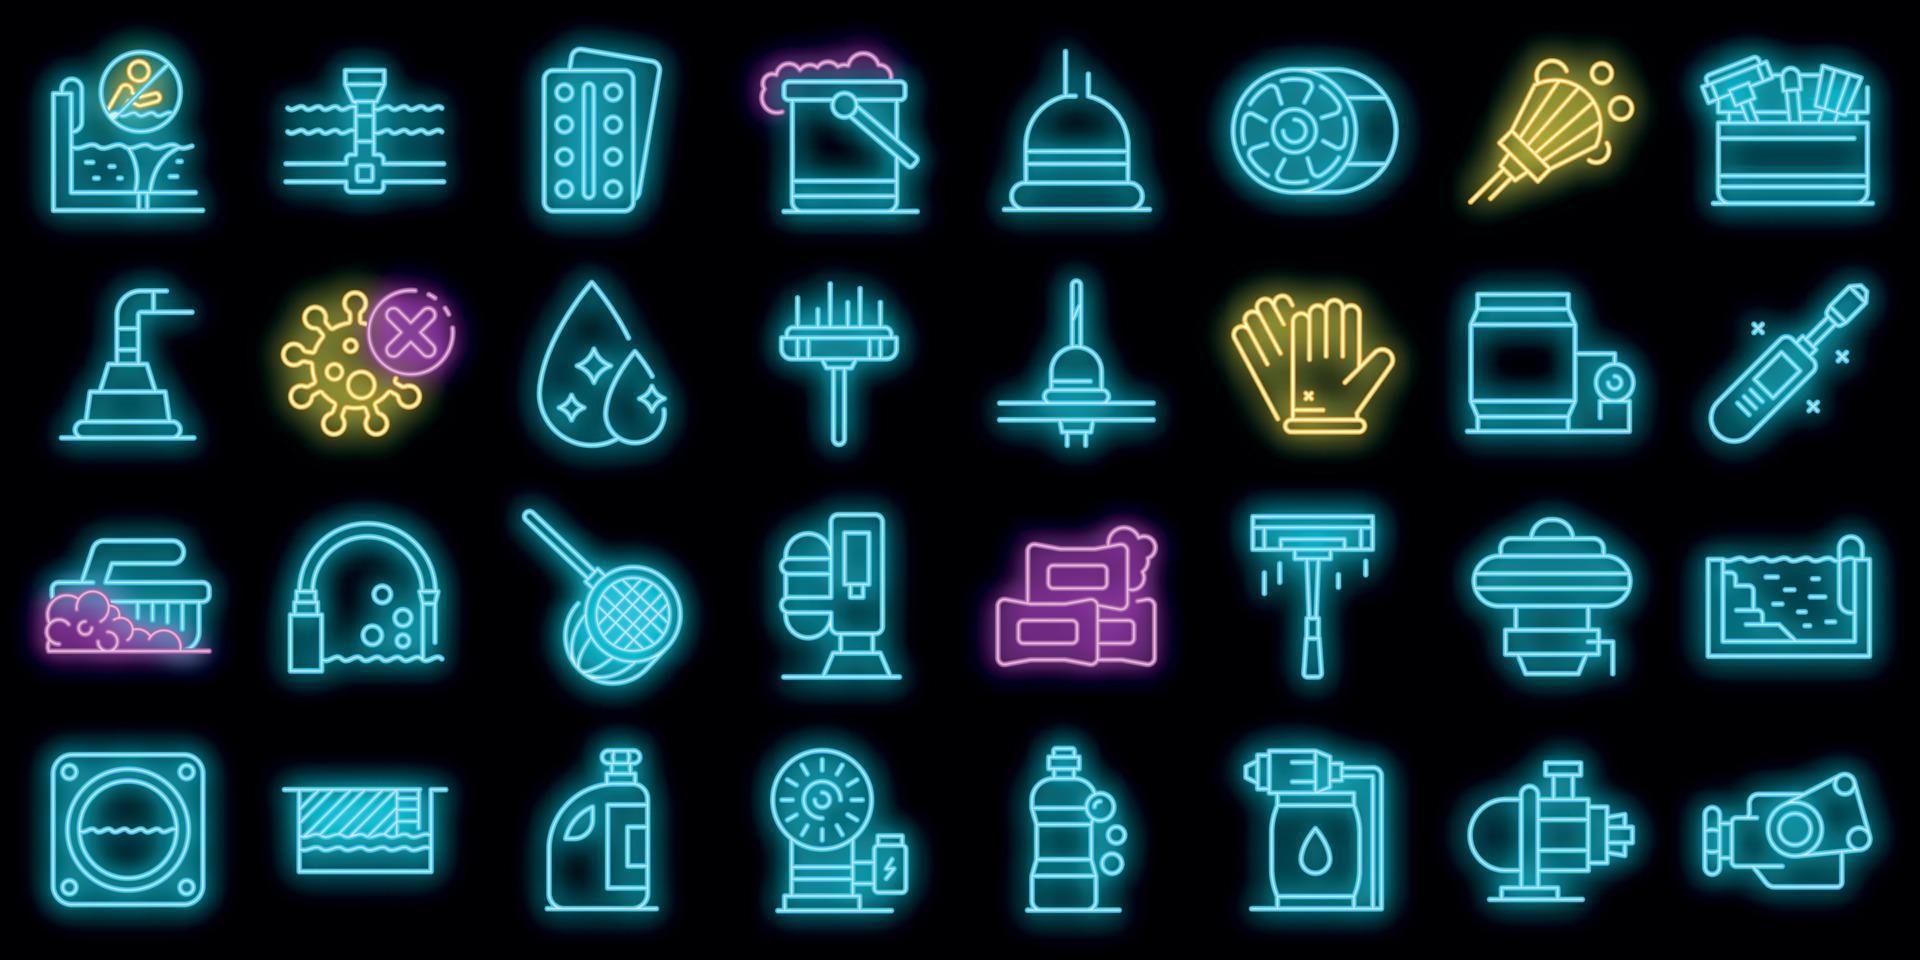 Pool cleaning icons set vector neon